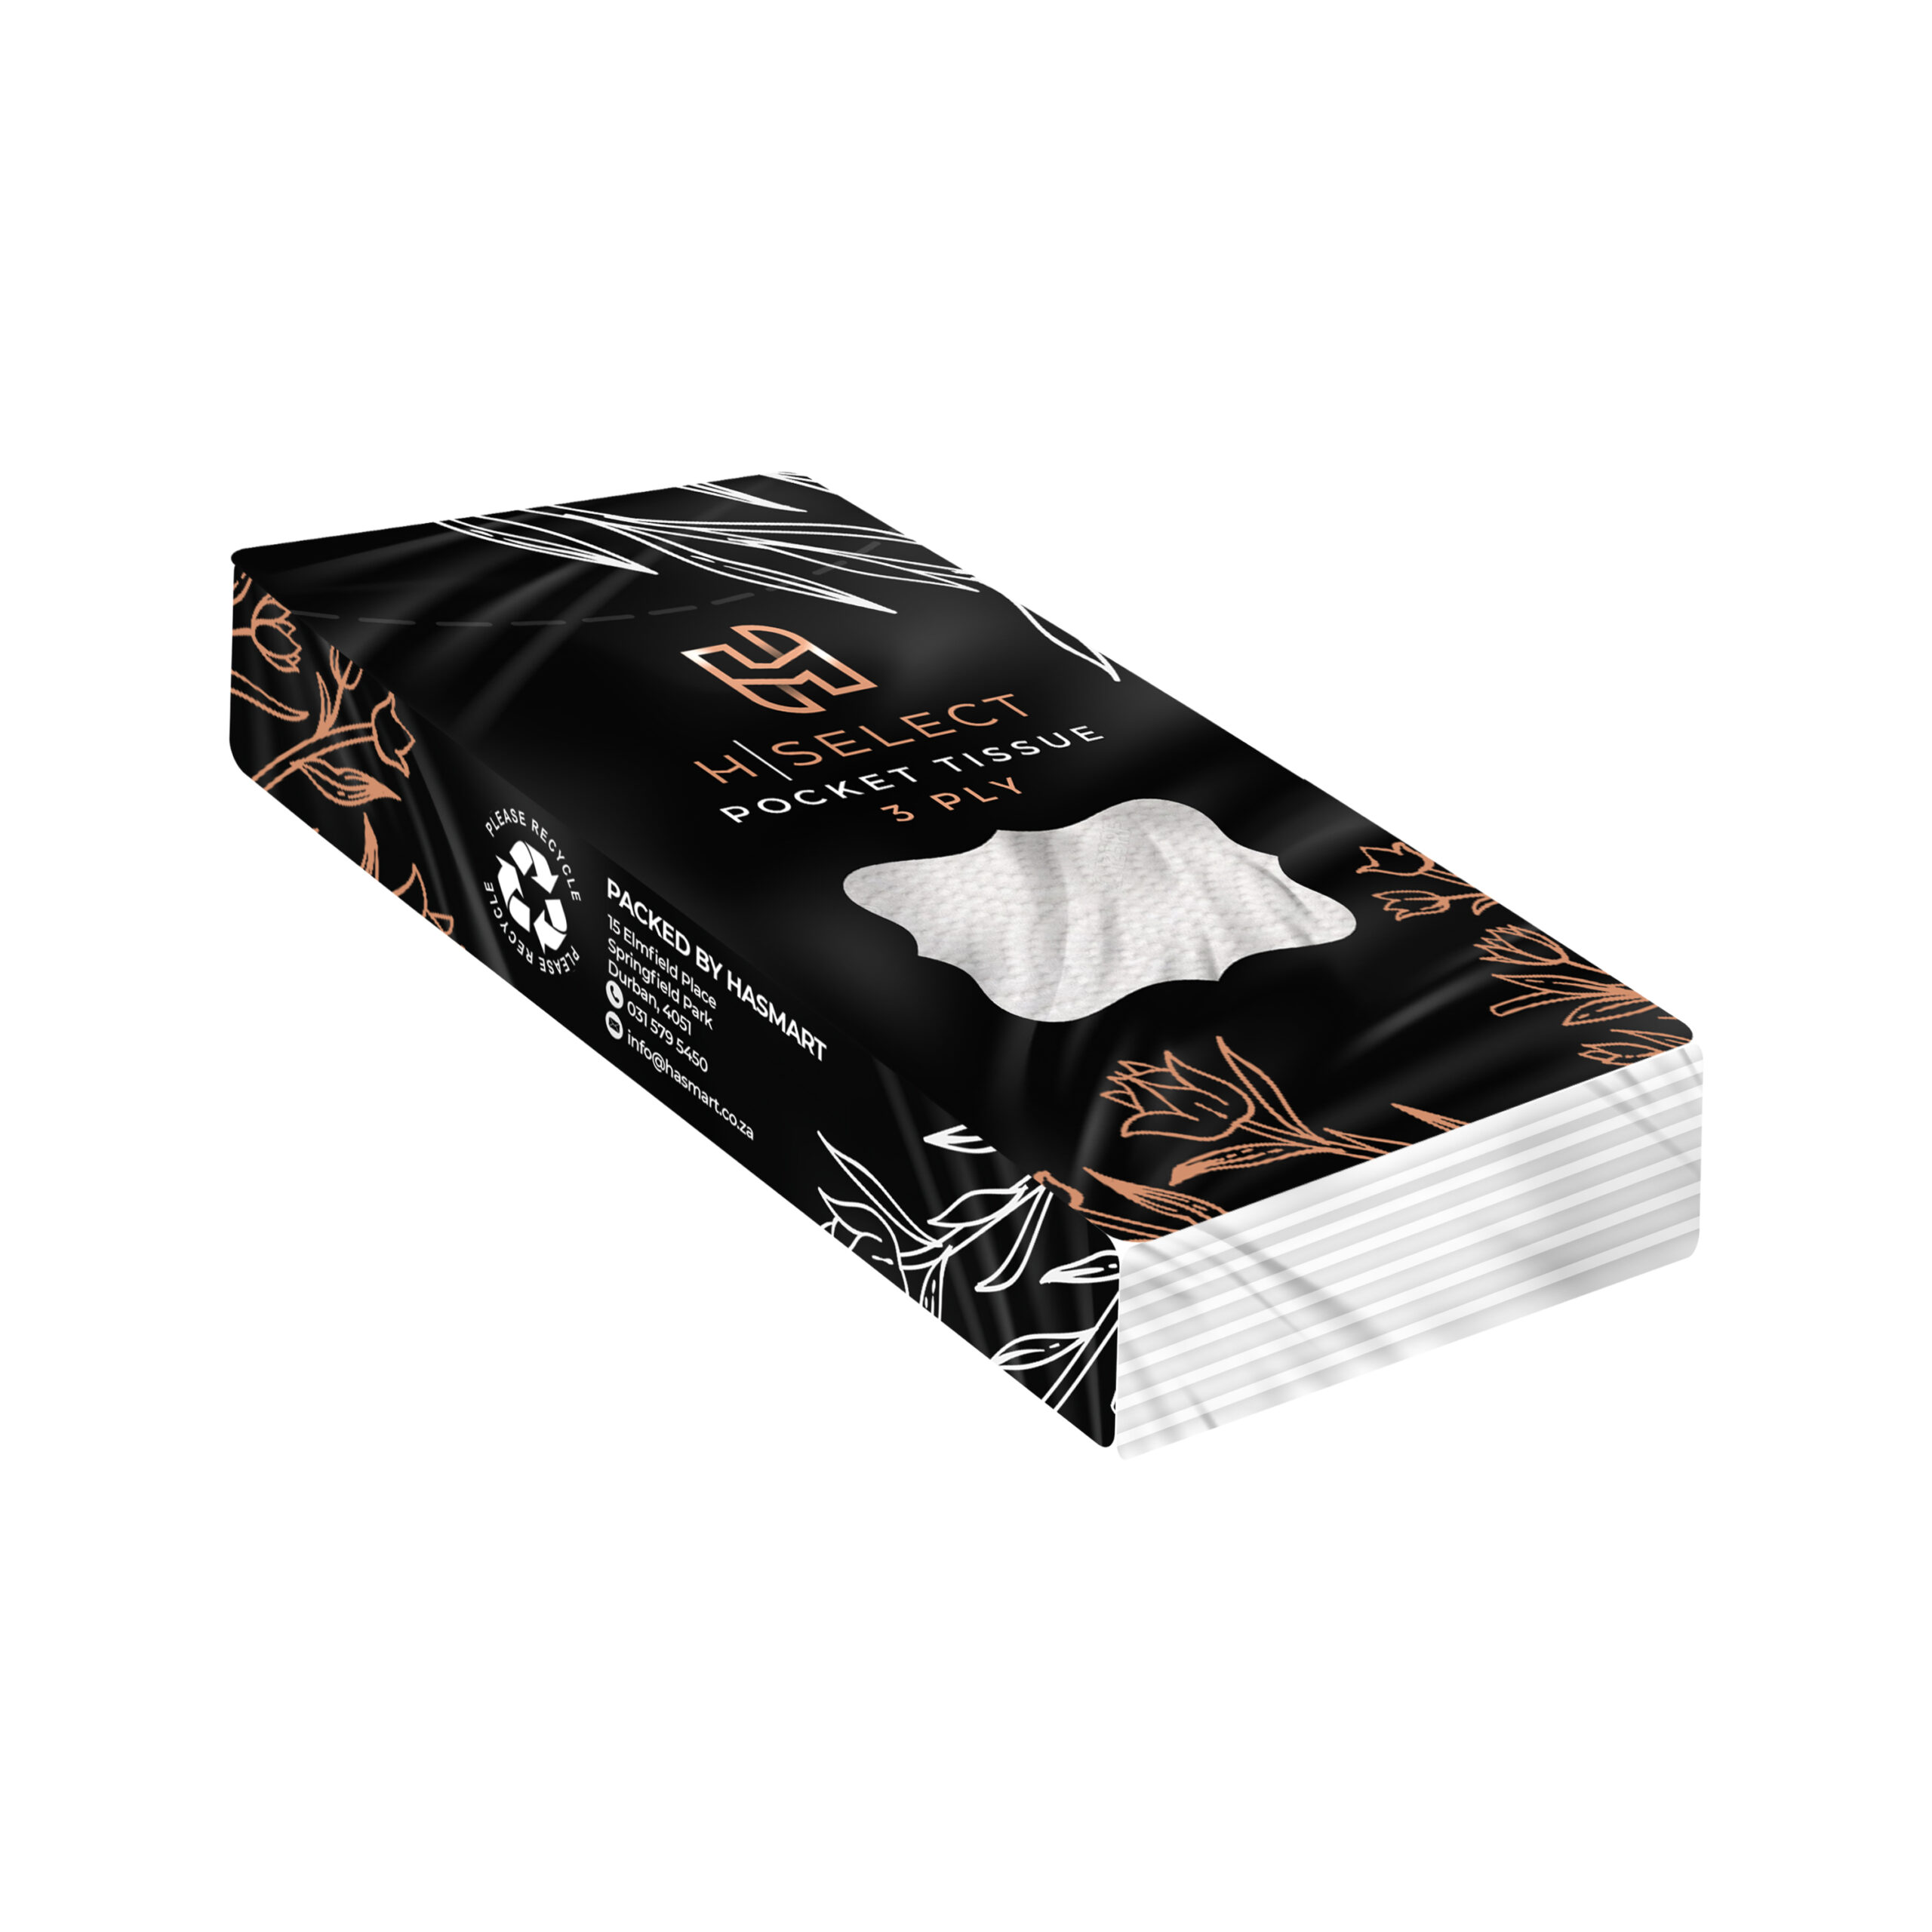 H-SELECT POCKET
TISSUE 3 PLY 10
SHEETS
210x205mm